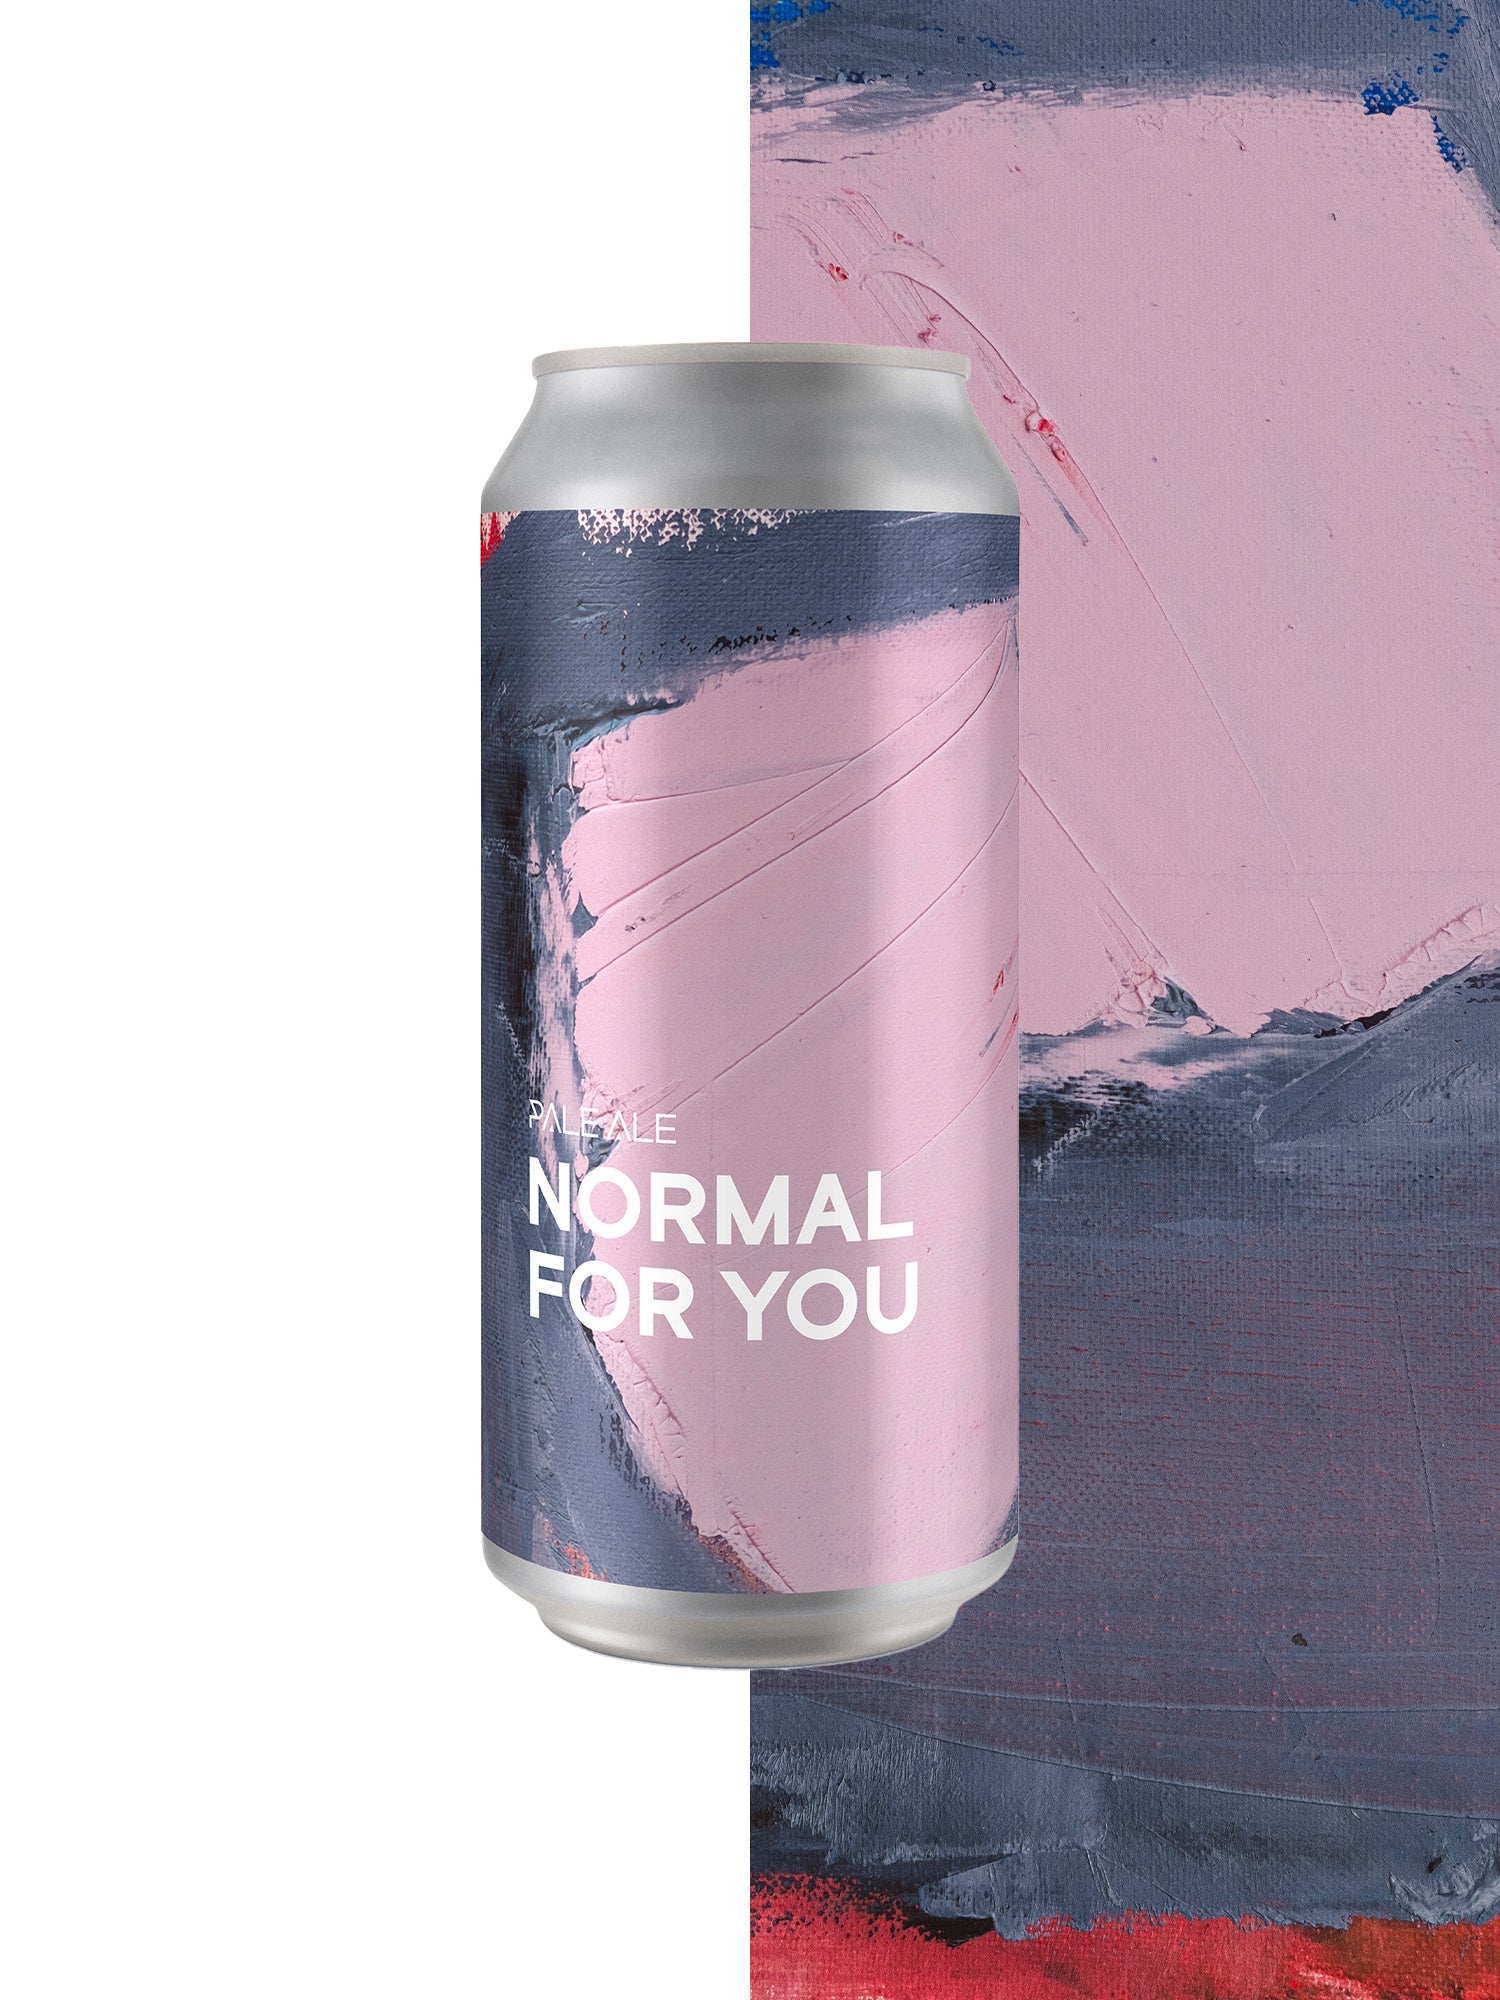 NORMAL FOR YOU  Pale Ale (4-pack) 4.5%